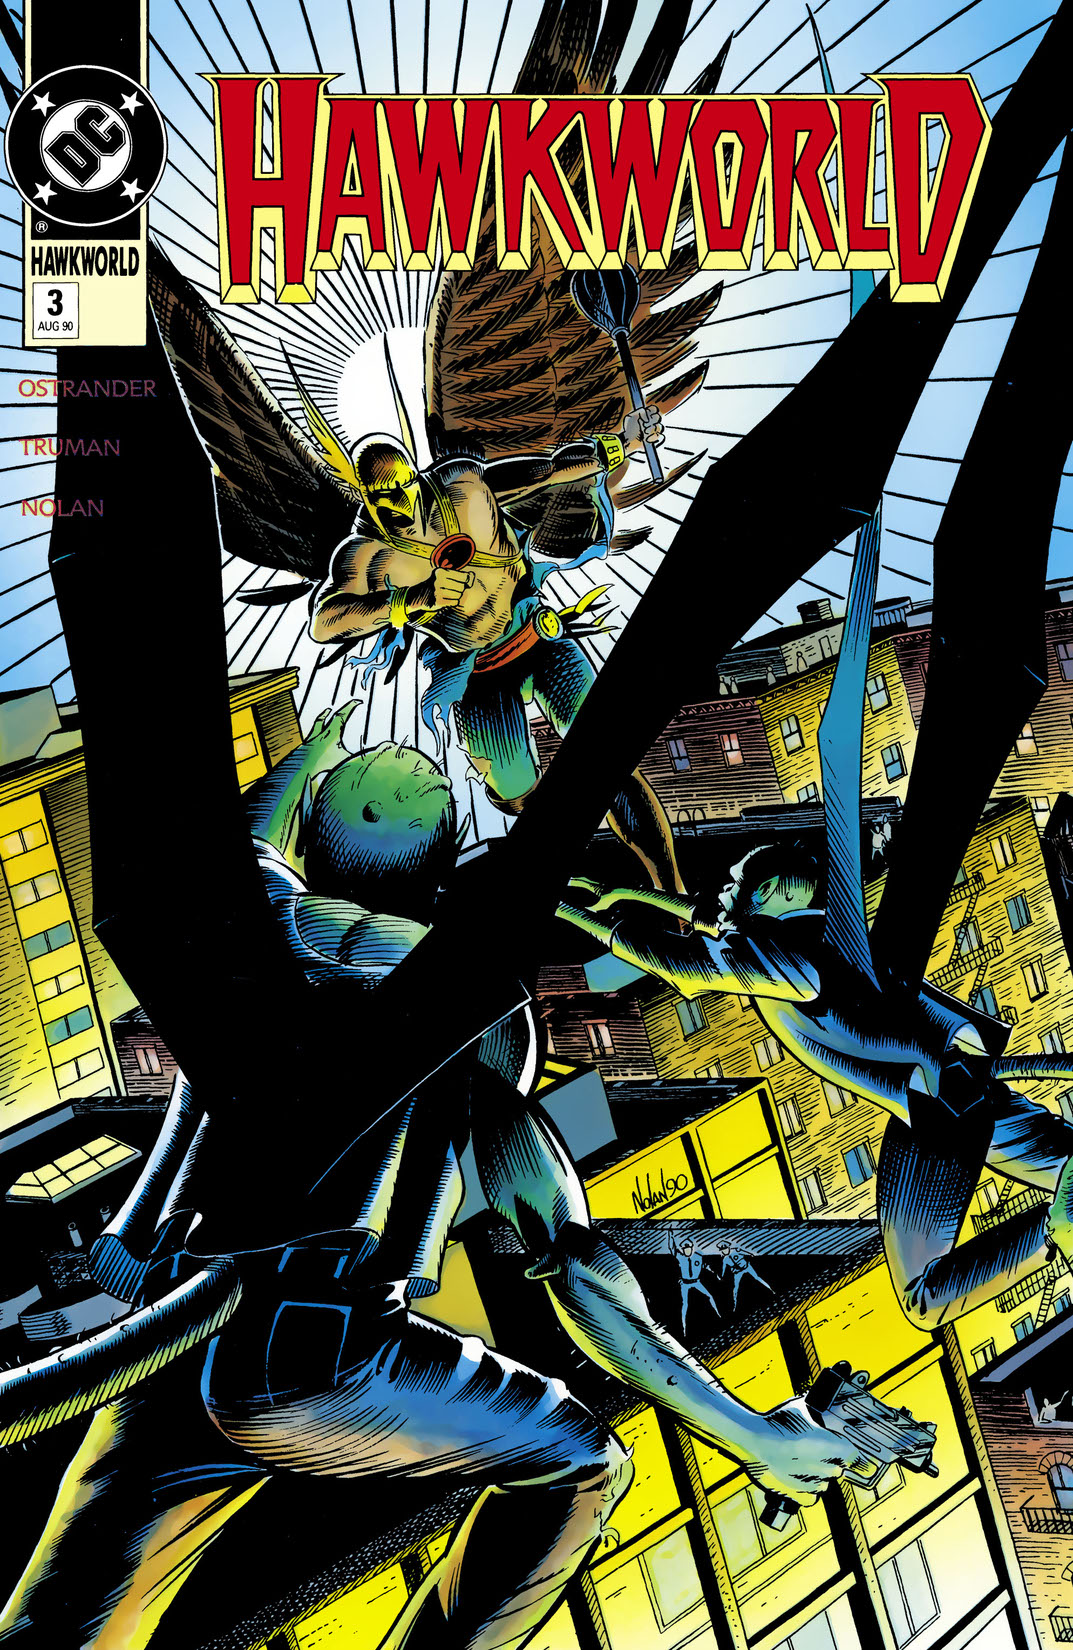 Hawkworld (1989-) #3 preview images